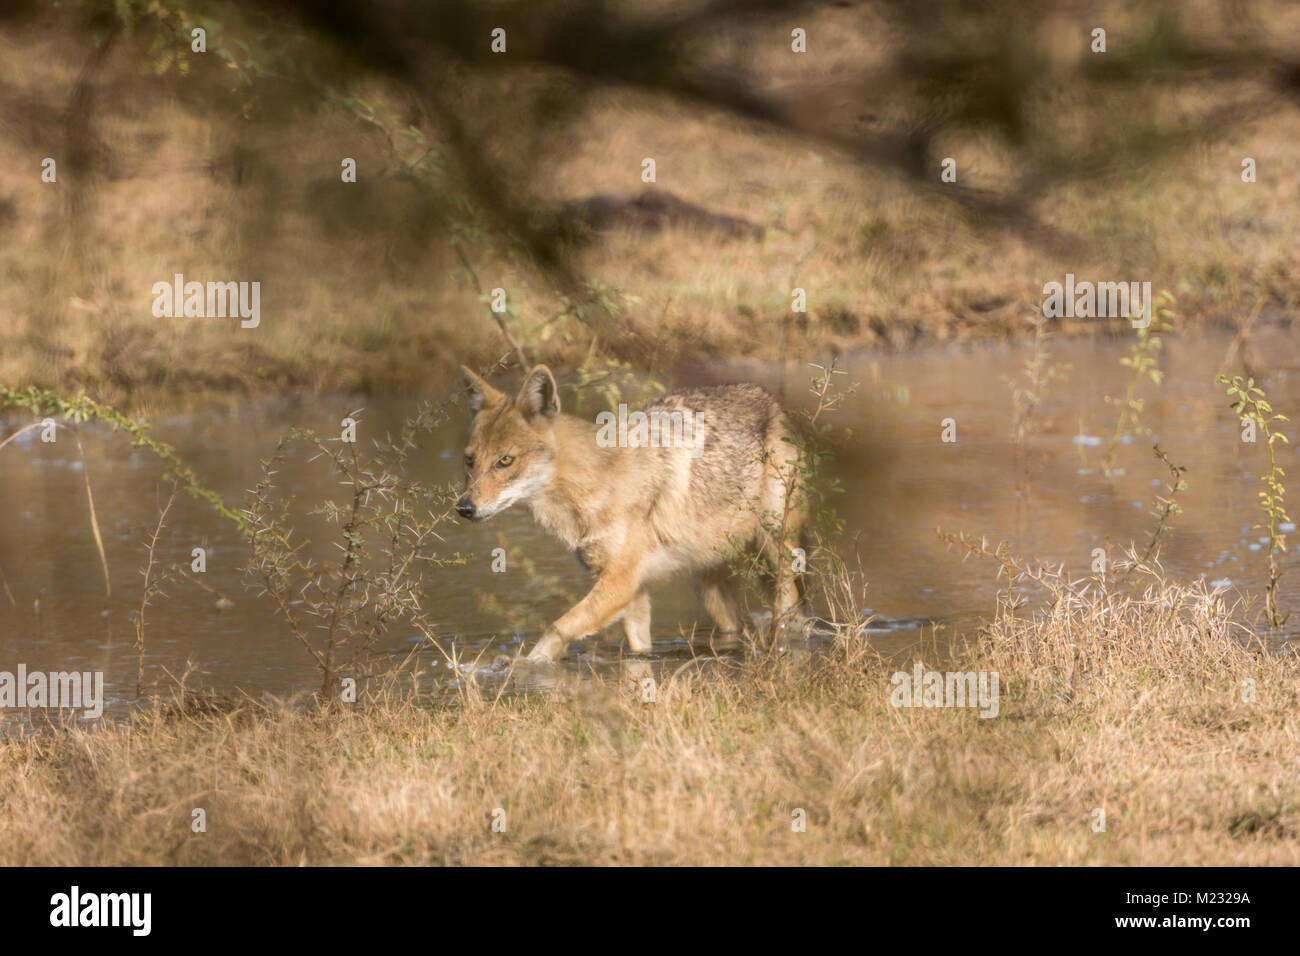 The golden jackal (Canis aureus) walking in water at Bharatpur Bird Sanctuary in Rajasthan, India Stock Photo